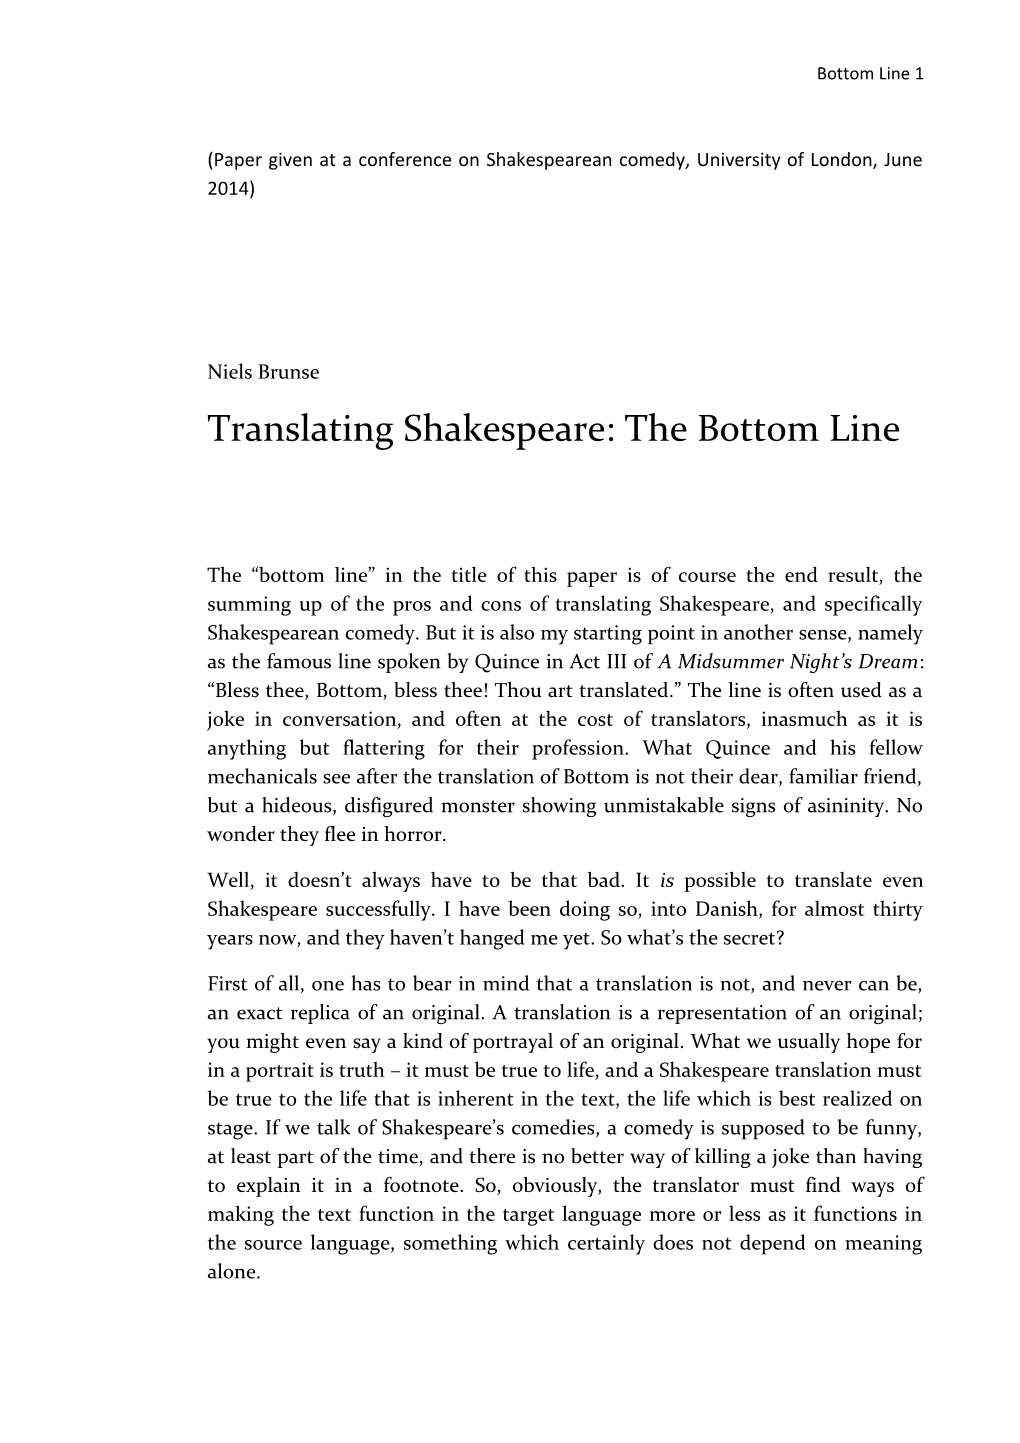 Paper Given at a Conference on Shakespearean Comedy, University of London, June 2014